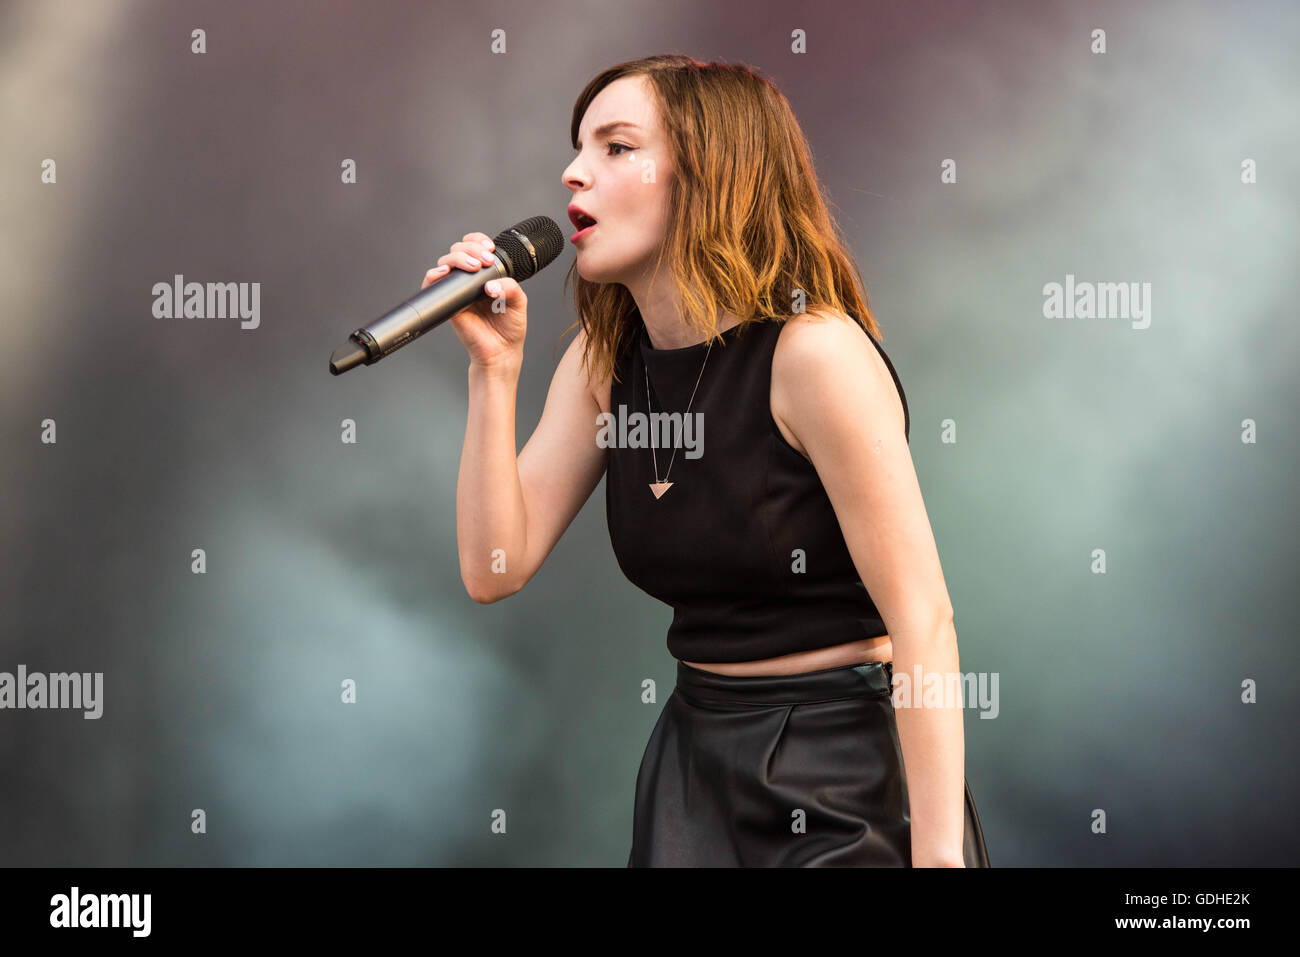 Lauren Mayberry Of Chvrches Performs At Latitude Festival At Henham Park Estate On July 16 16 In Southwold England Stock Photo Alamy